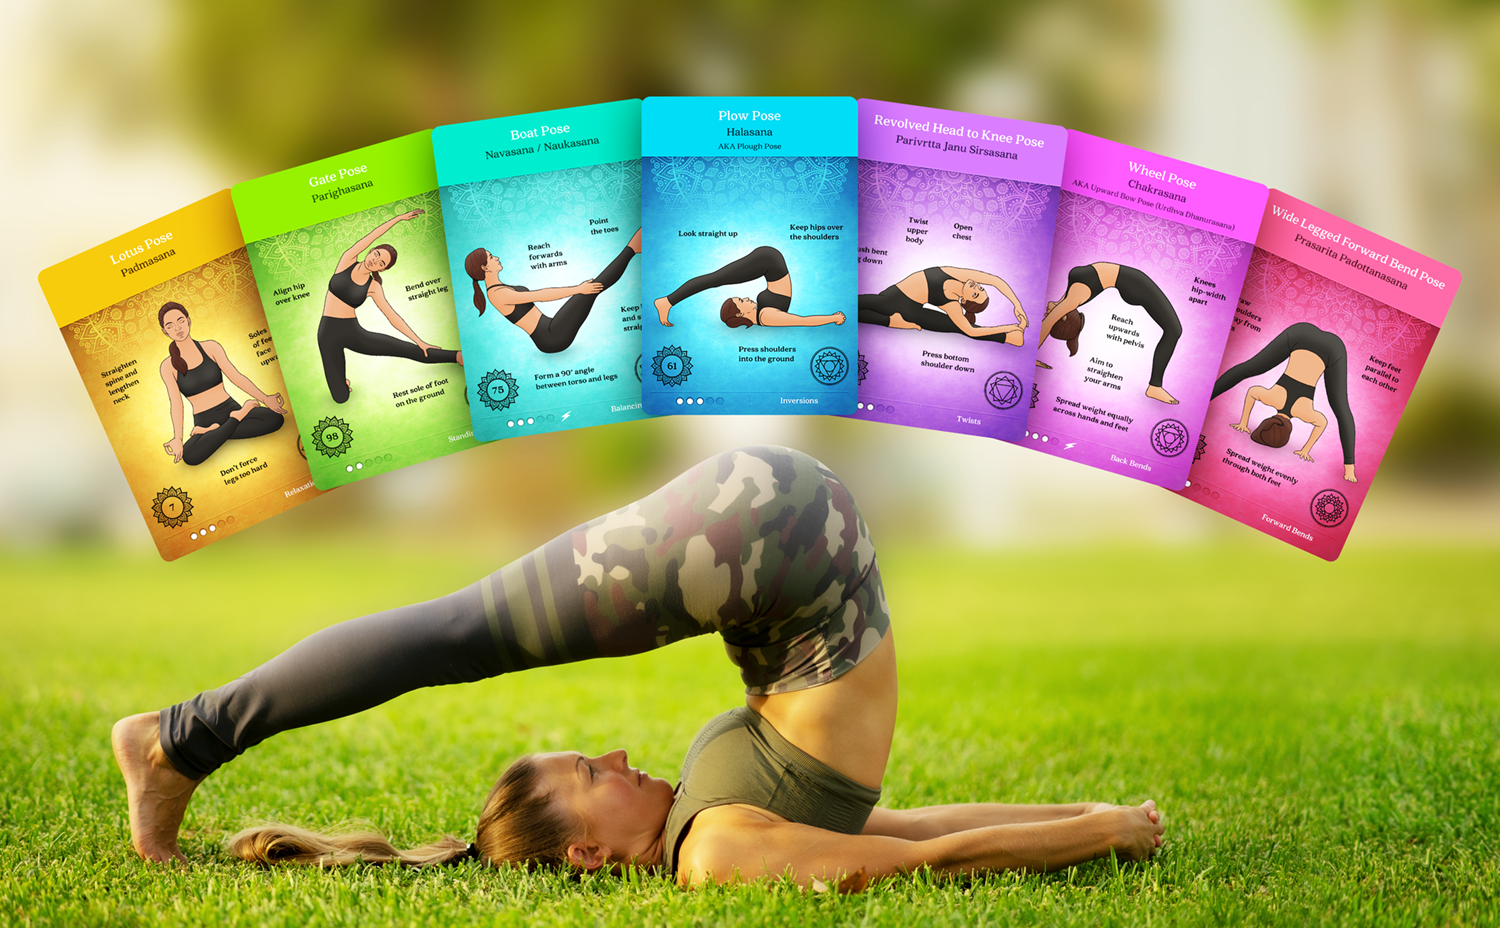 Premium Yoga Cards by Asana Moon Deck with over 120 Yoga Poses